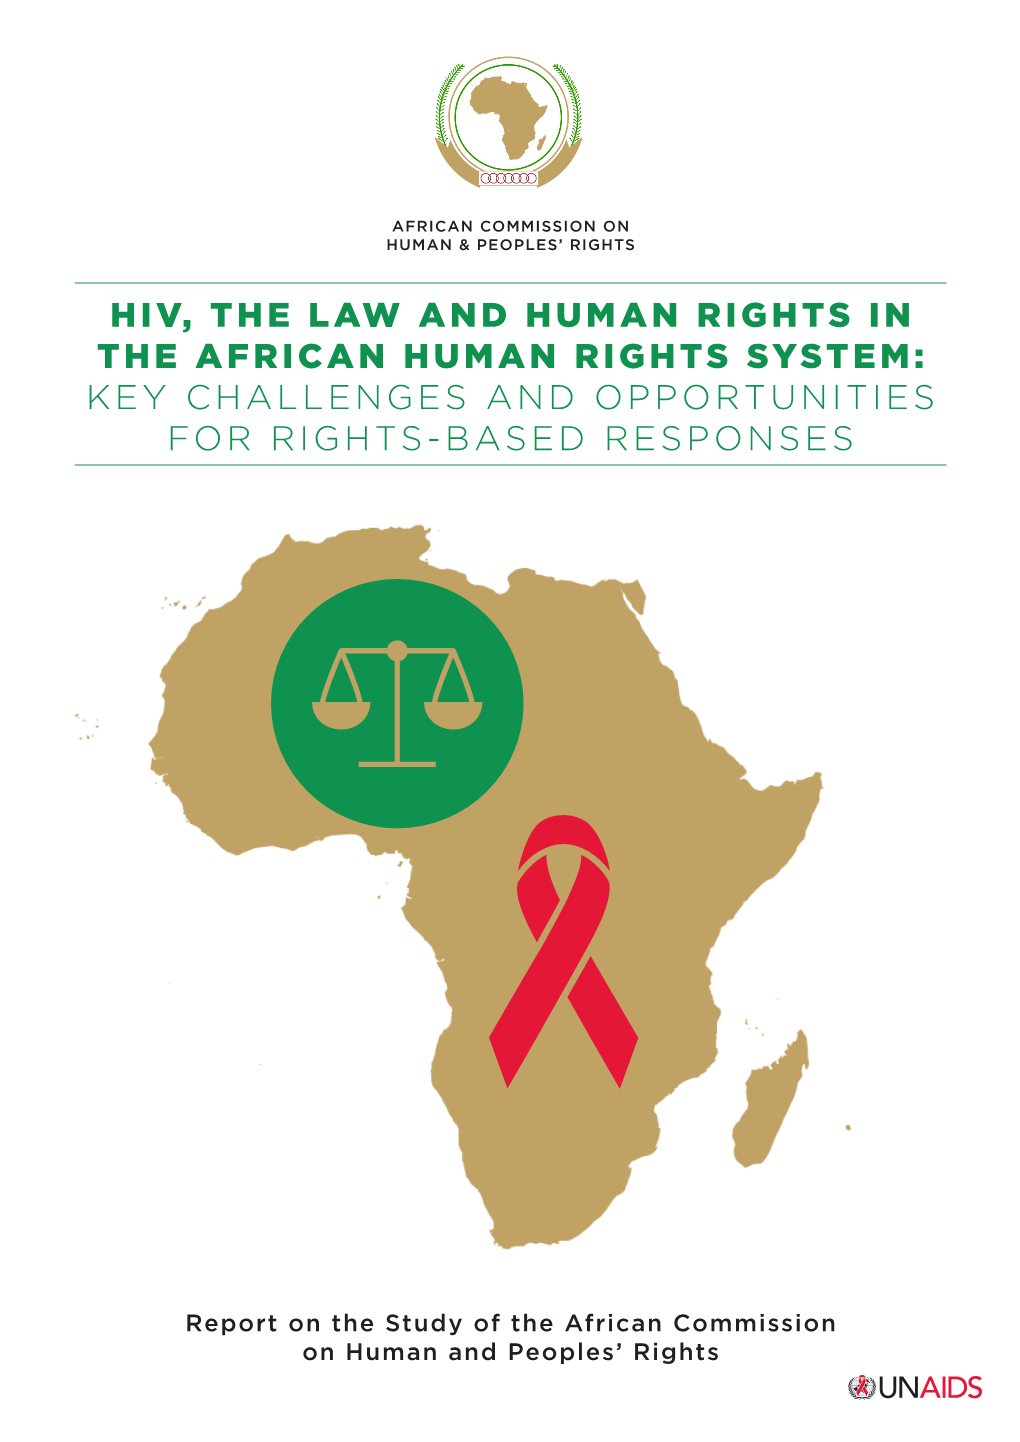 Hiv, the Law and Human Rights in the African Human Rights System: Key Challenges and Opportunities for Rights-Based Responses